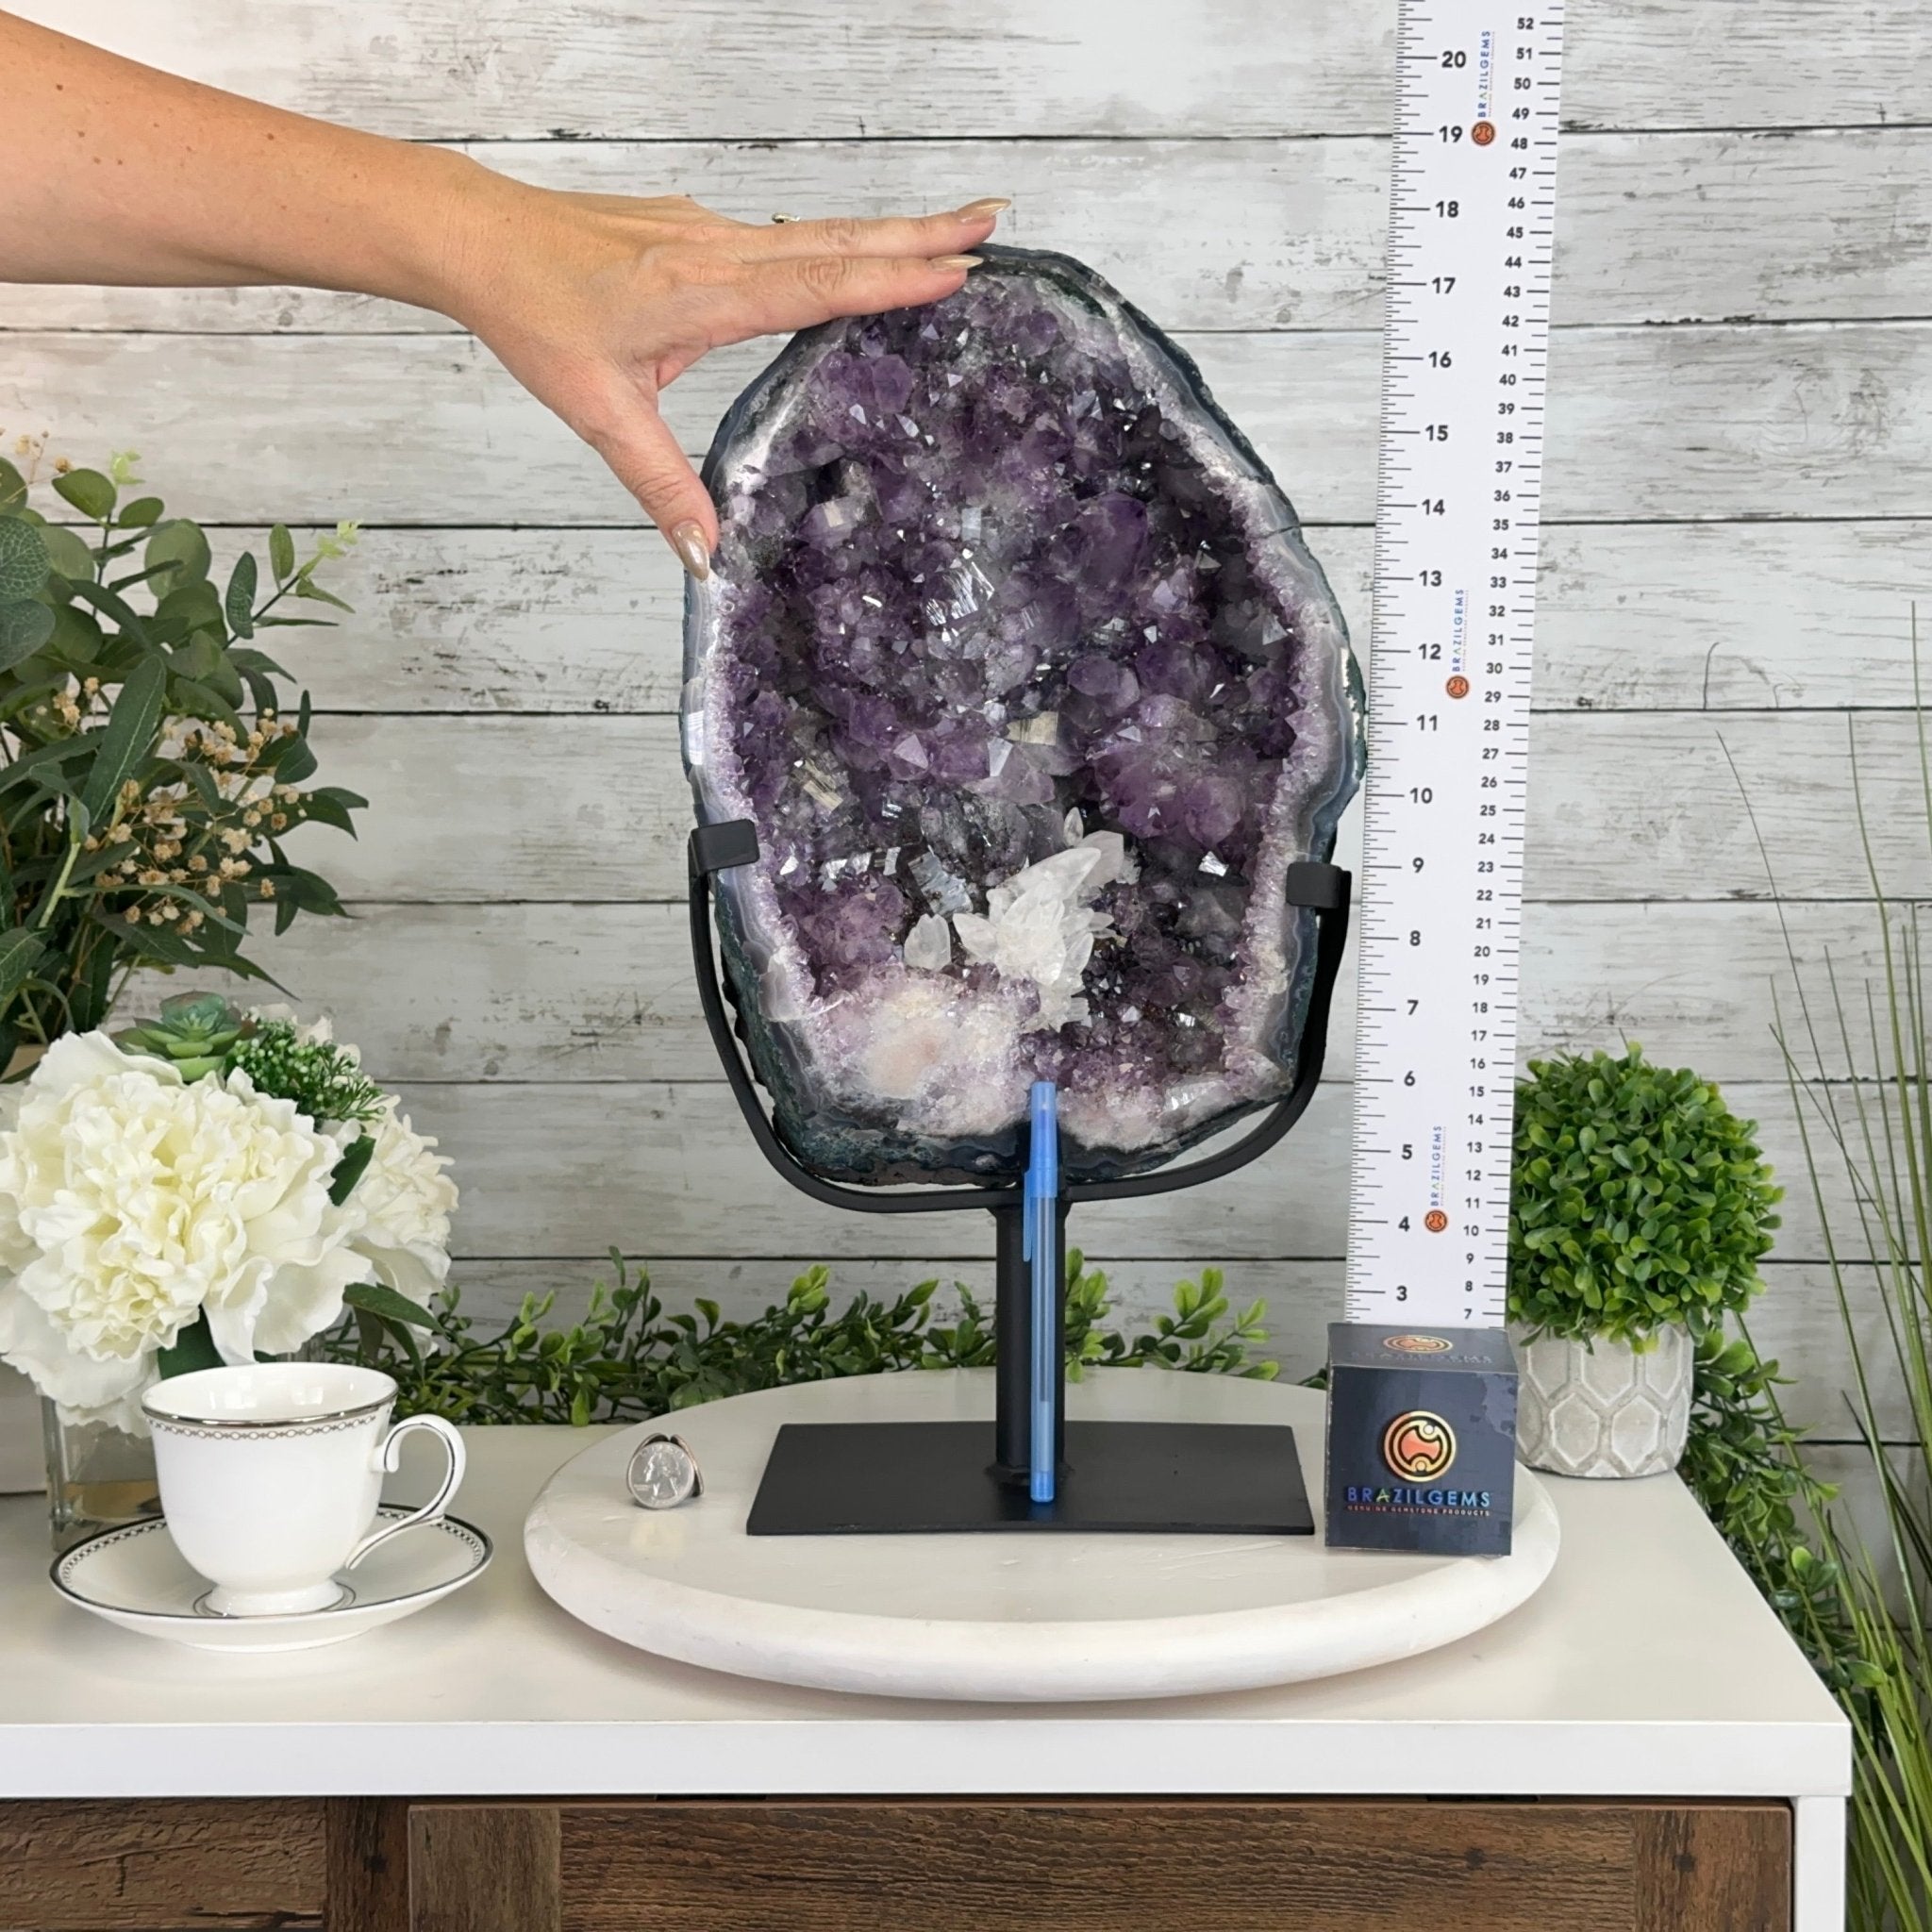 Amethyst Cluster on a Metal Base, 28.4 lbs & 17.5" Tall, #5491 - 0101 - Brazil GemsBrazil GemsAmethyst Cluster on a Metal Base, 28.4 lbs & 17.5" Tall, #5491 - 0101Clusters on Fixed Bases5491 - 0101